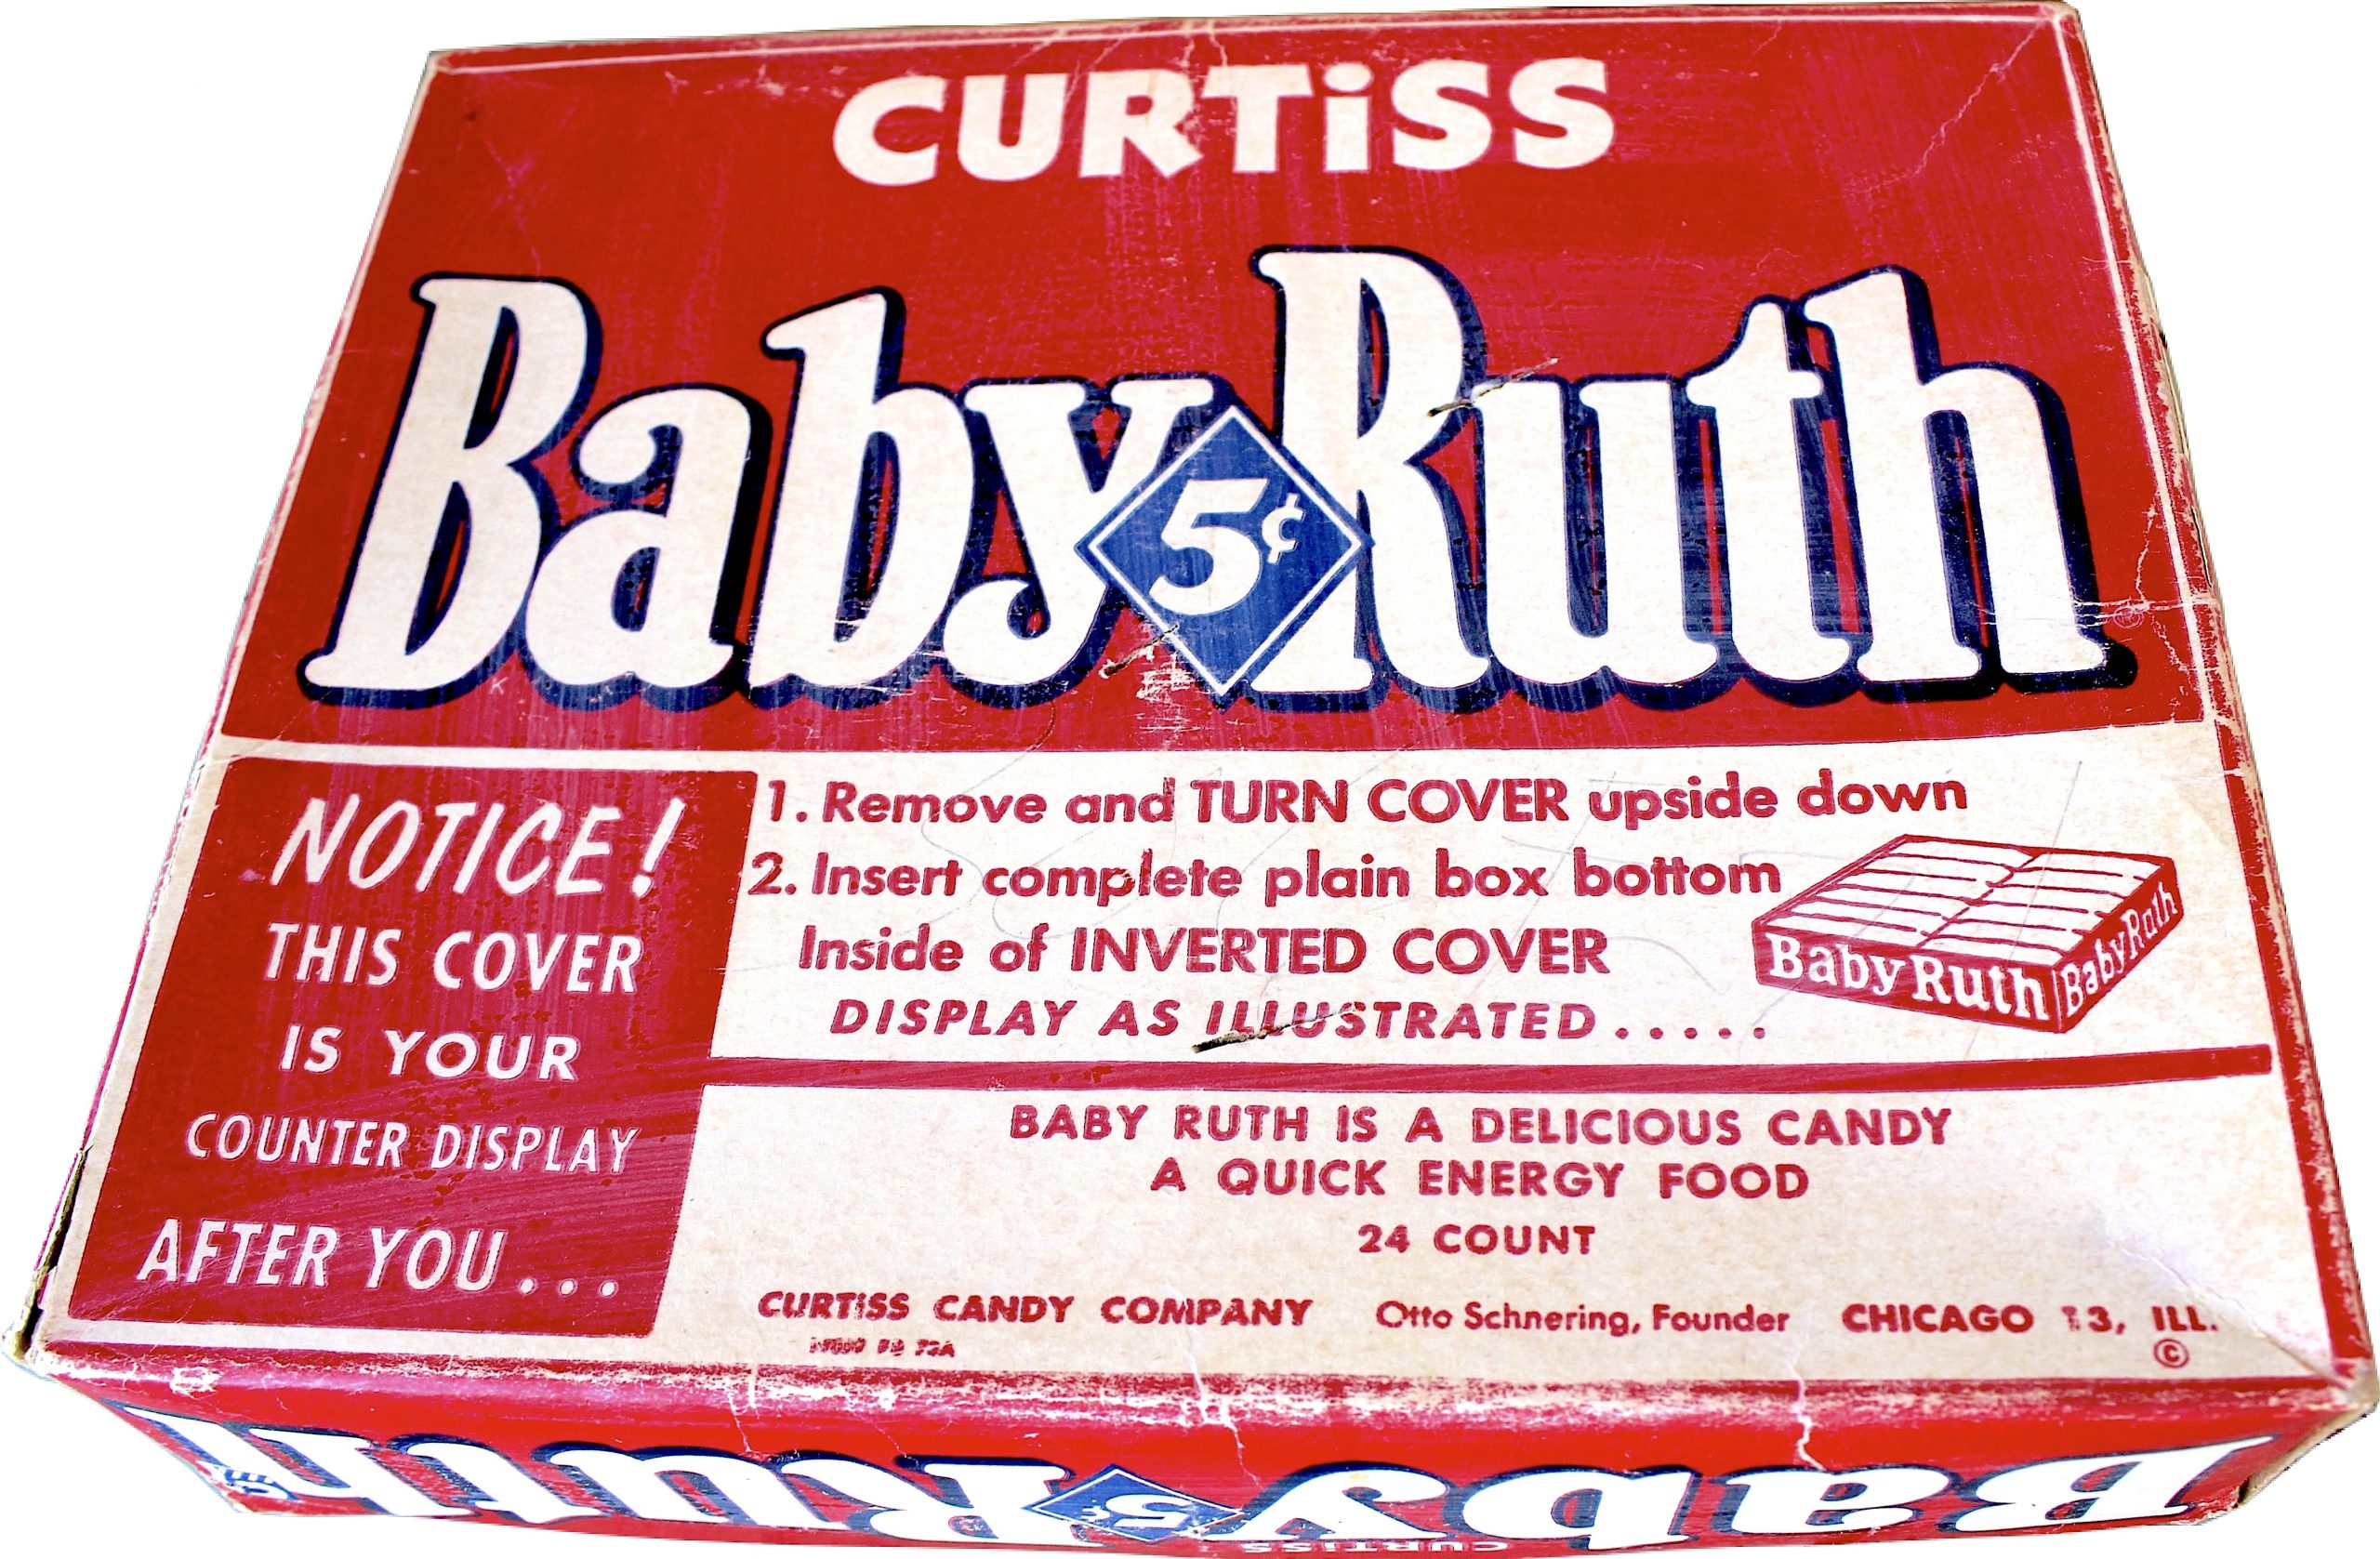 Curtiss Candy History - Baby Ruth